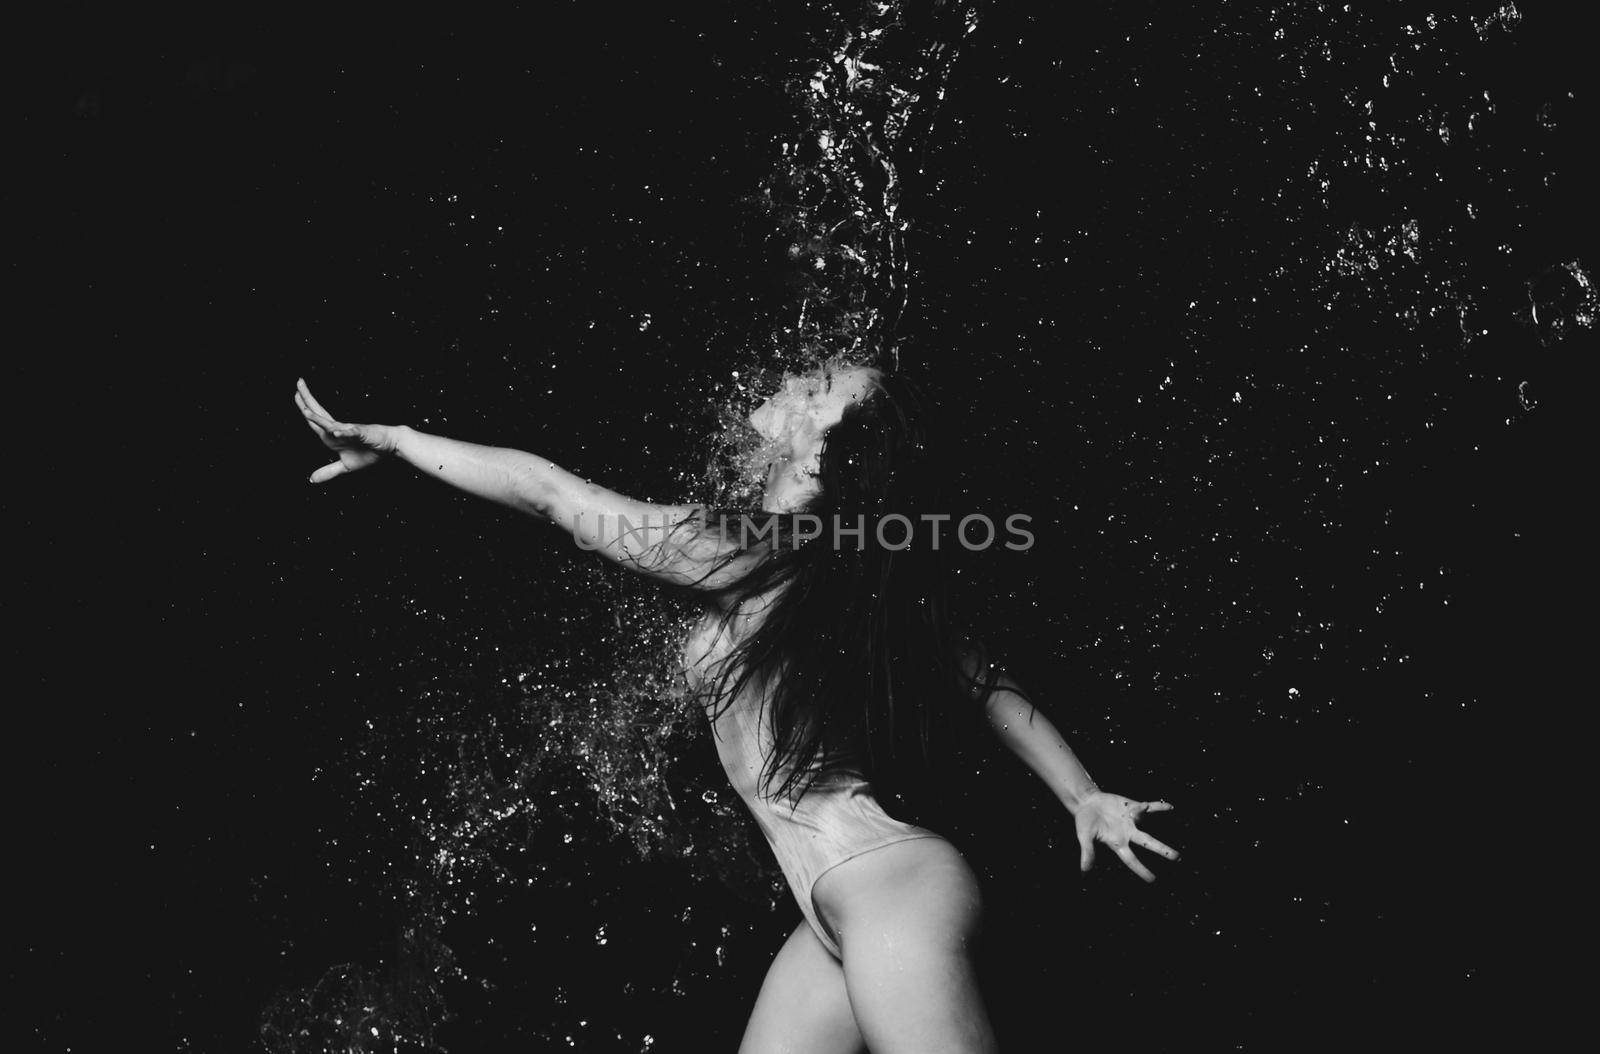 young beautiful woman of Caucasian appearance with long hair dances in drops of water on a black background. Jumping and swinging arms, dressed in a beige bodysuit